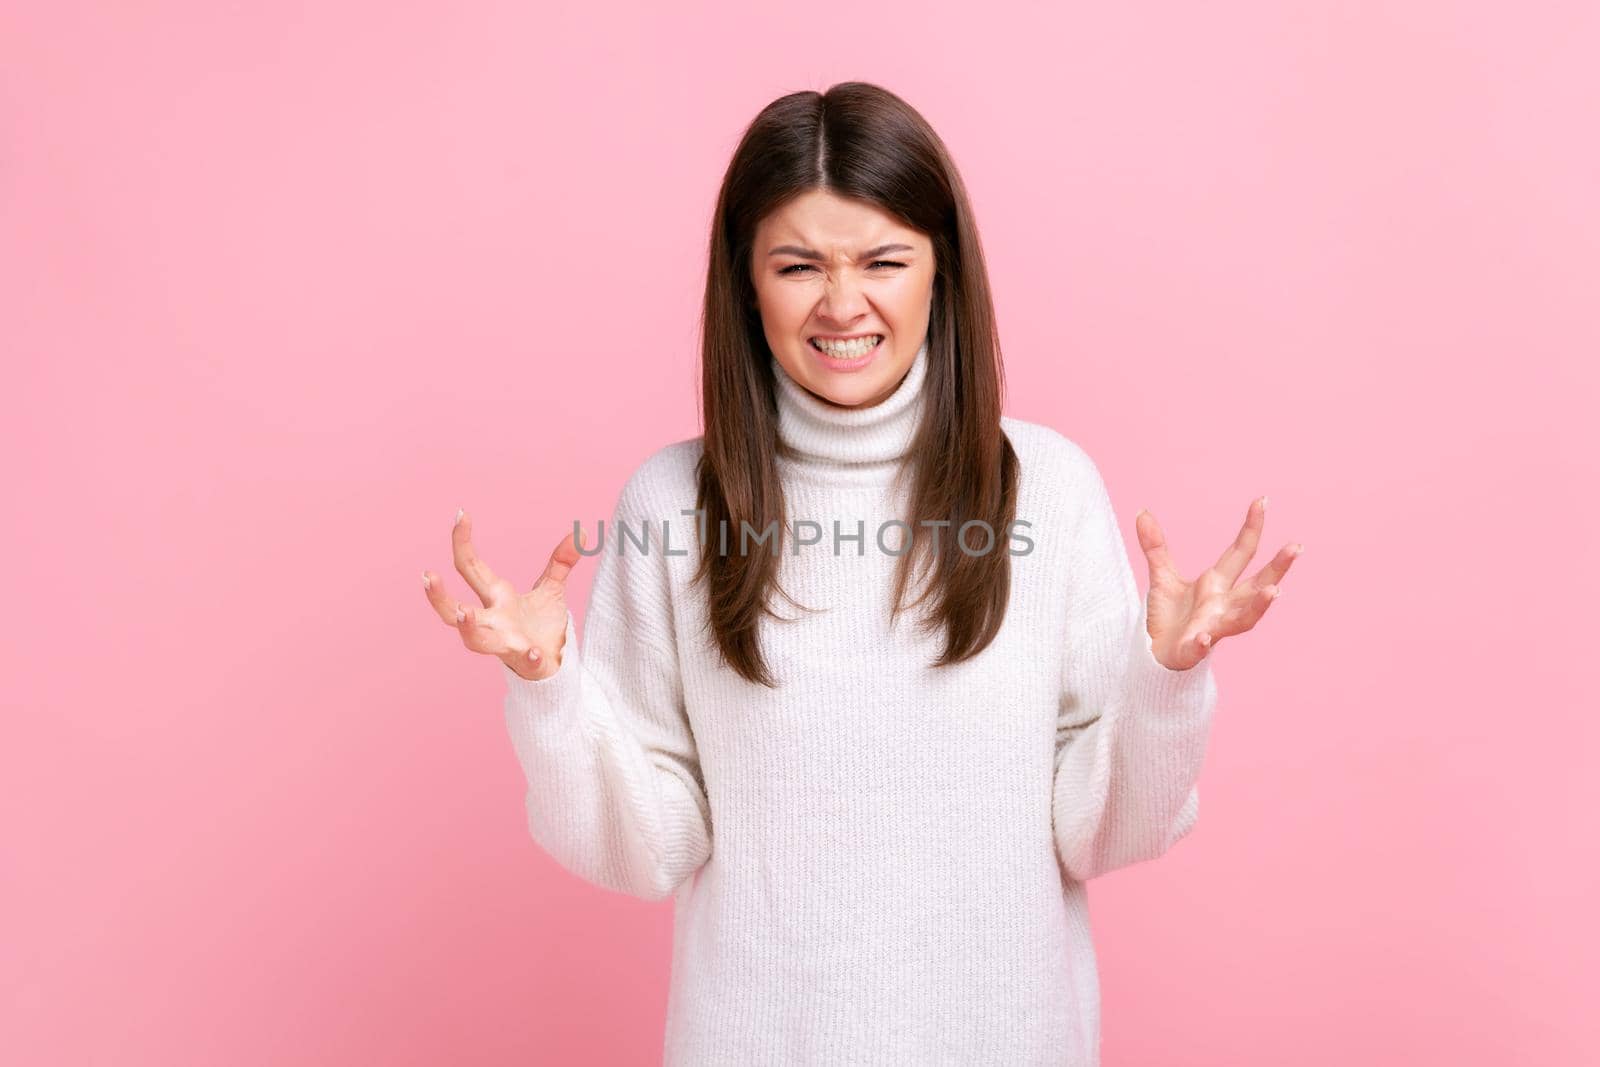 Portrait of angry female standing with raised arms, expressing aggression, screaming, frowning face, wearing white casual style sweater. Indoor studio shot isolated on pink background.